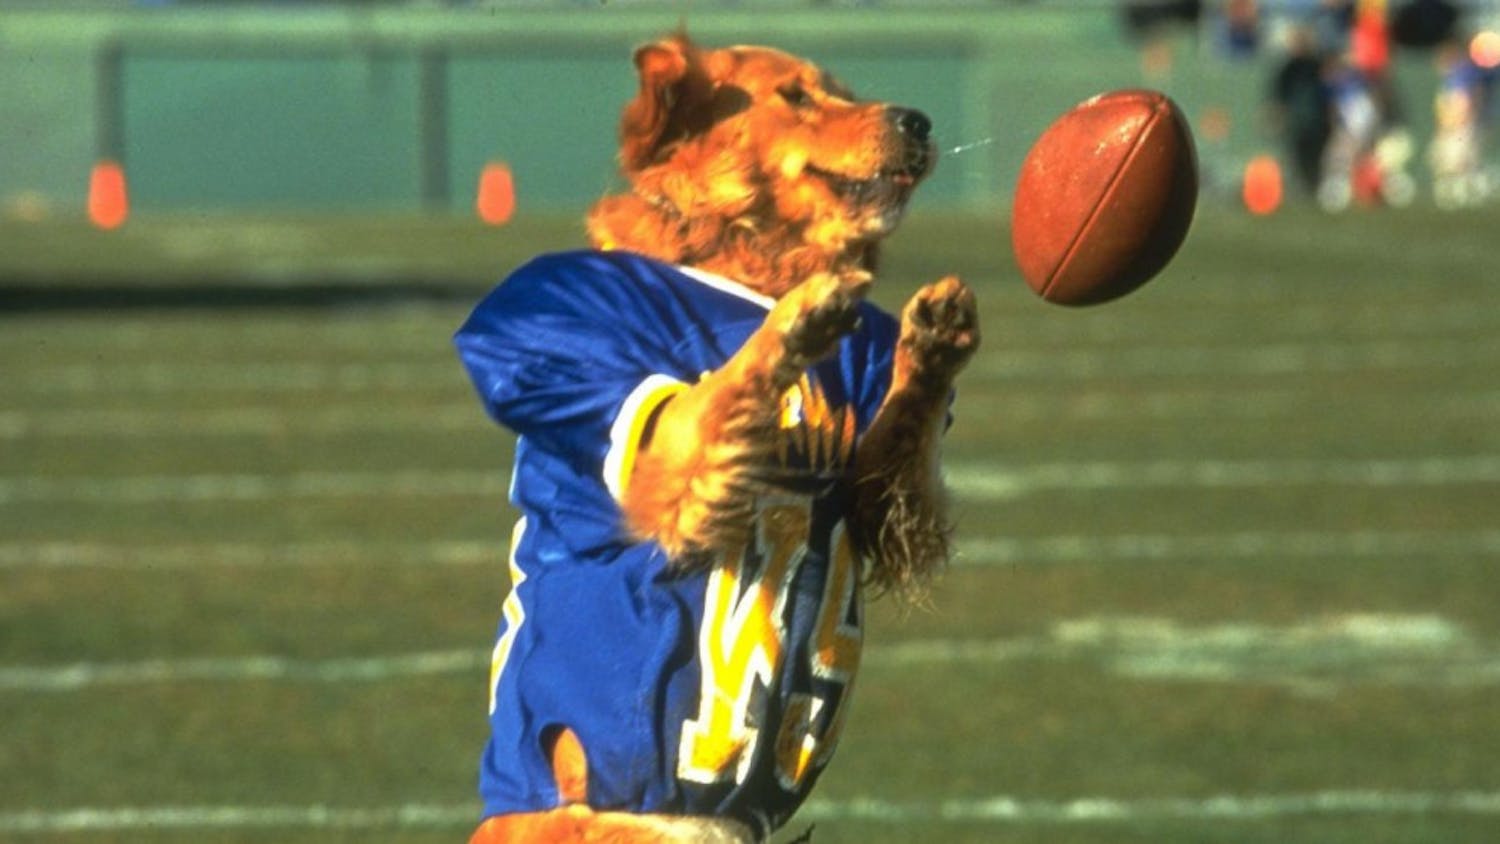 "Air Bud" may be the best sports movie of all timePhoto taken from&nbsp;Sports Illustrated